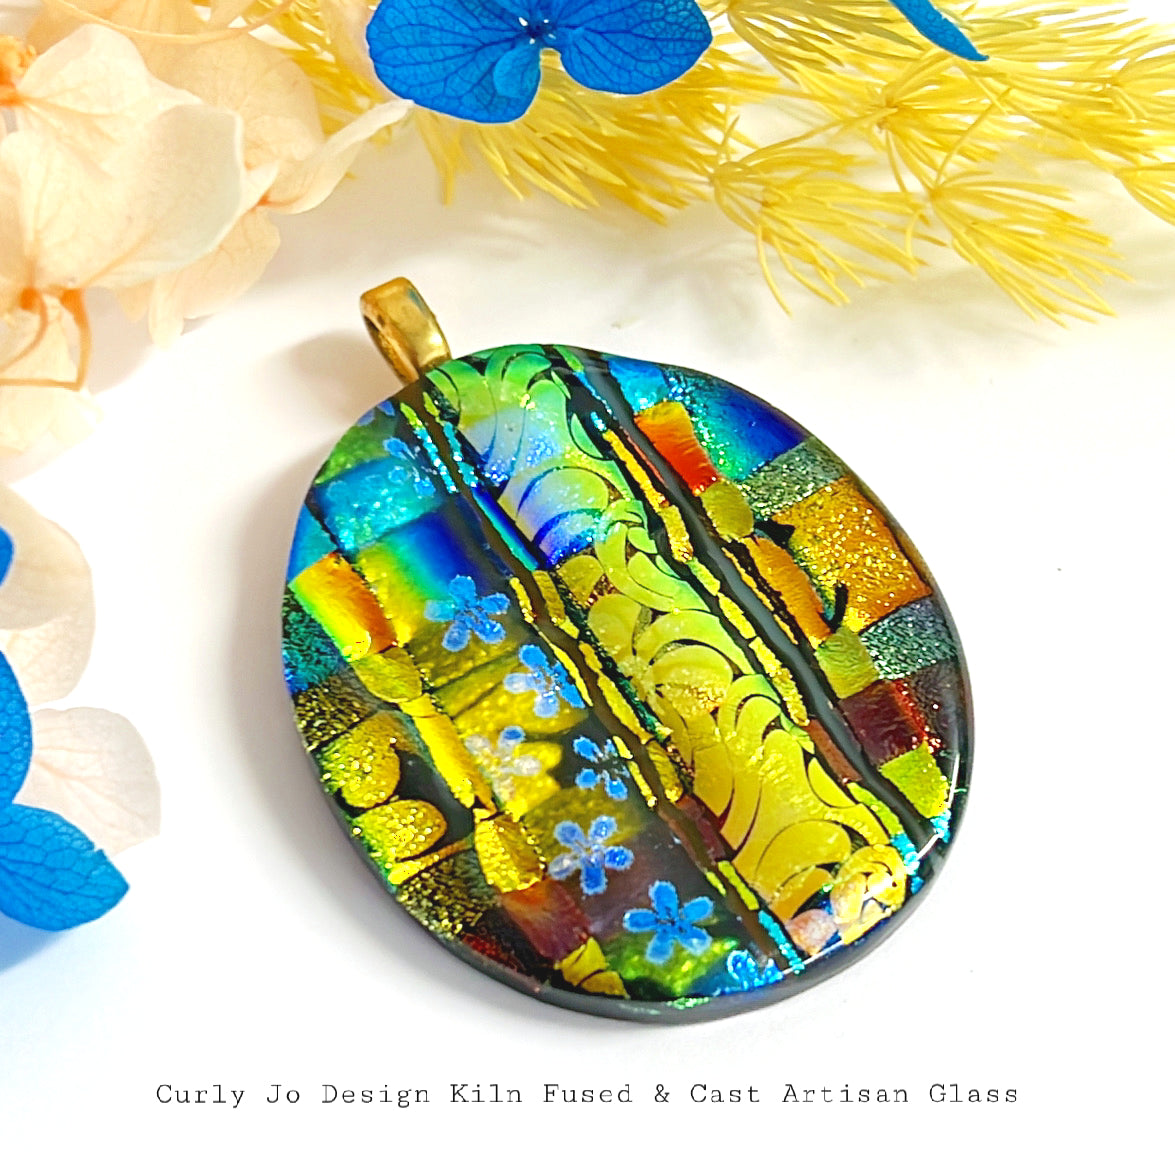 Cobalt Skies textured layers with woven gold aqua cobalt & ultramarine - Handcrafted Artisan Glass Pendant : Kiln-fused Dichroic Glass